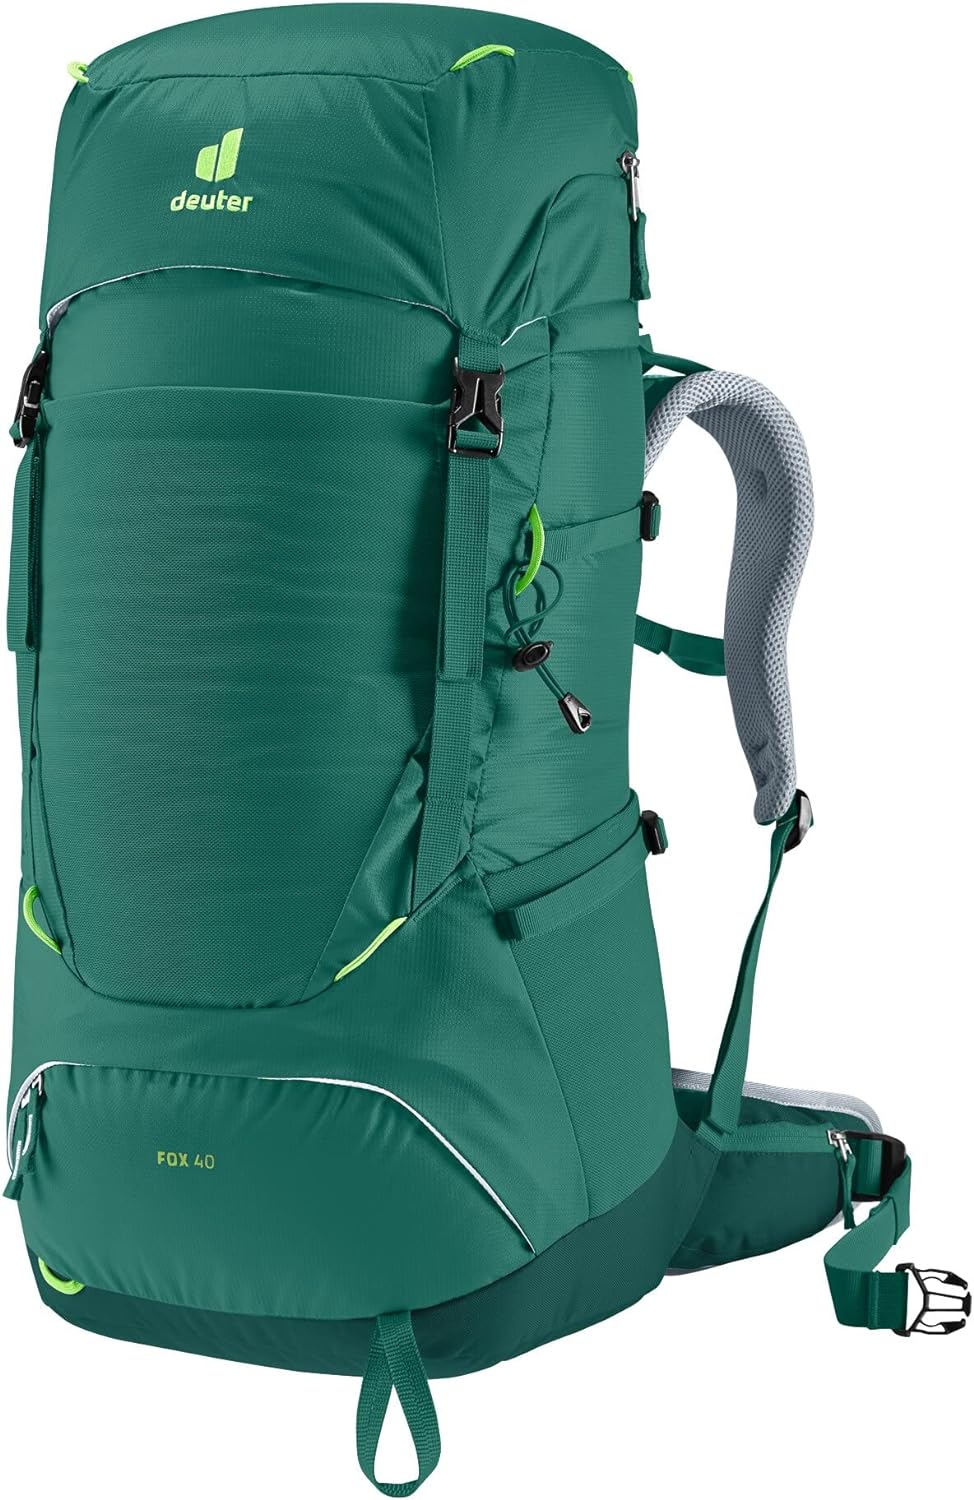 Deuter Fox 40+4L Backpack - Kids' - Backpacking ($65 with free shipping on $50+ orders)